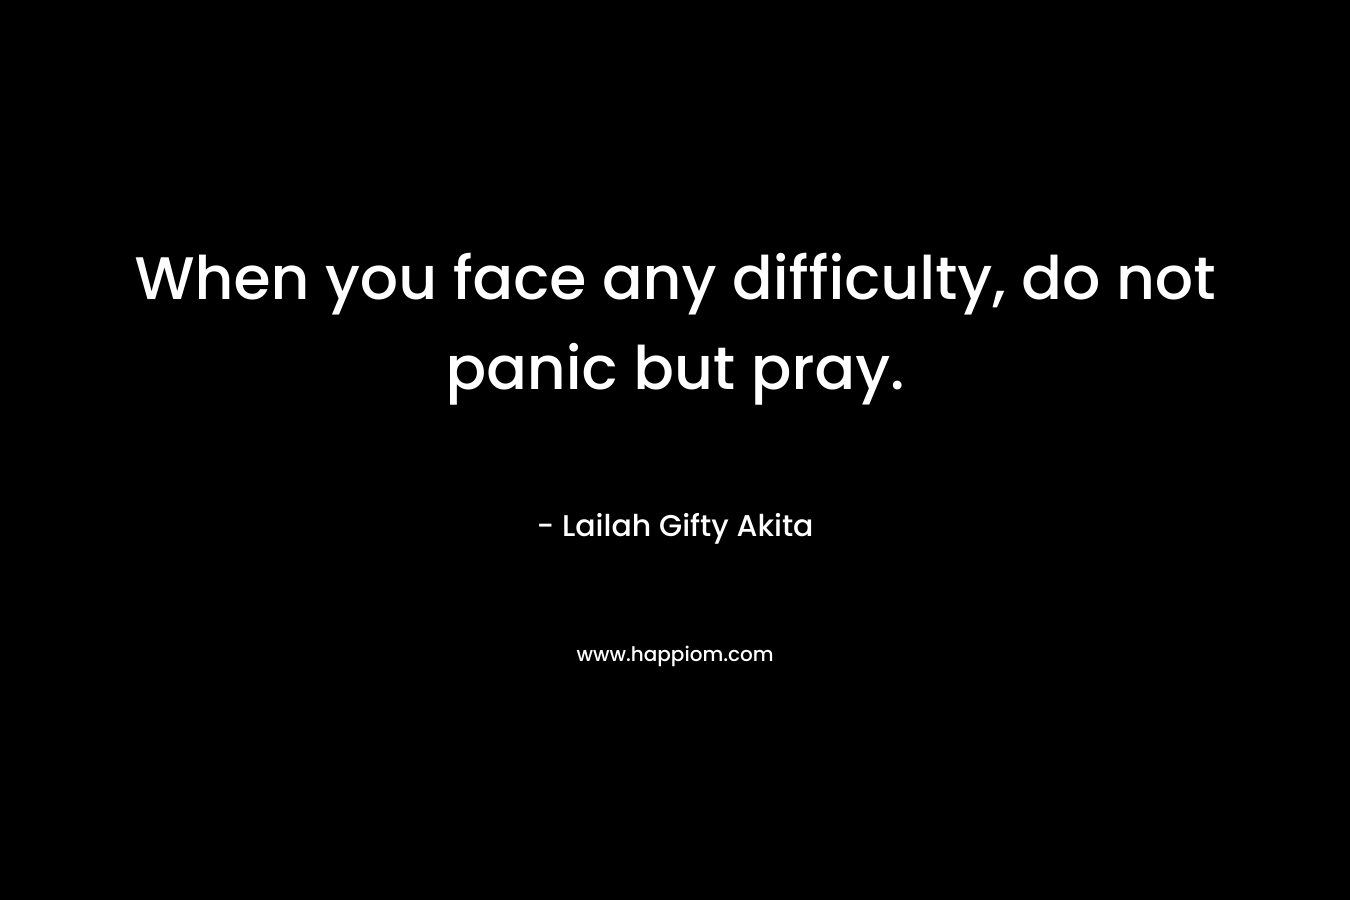 When you face any difficulty, do not panic but pray.